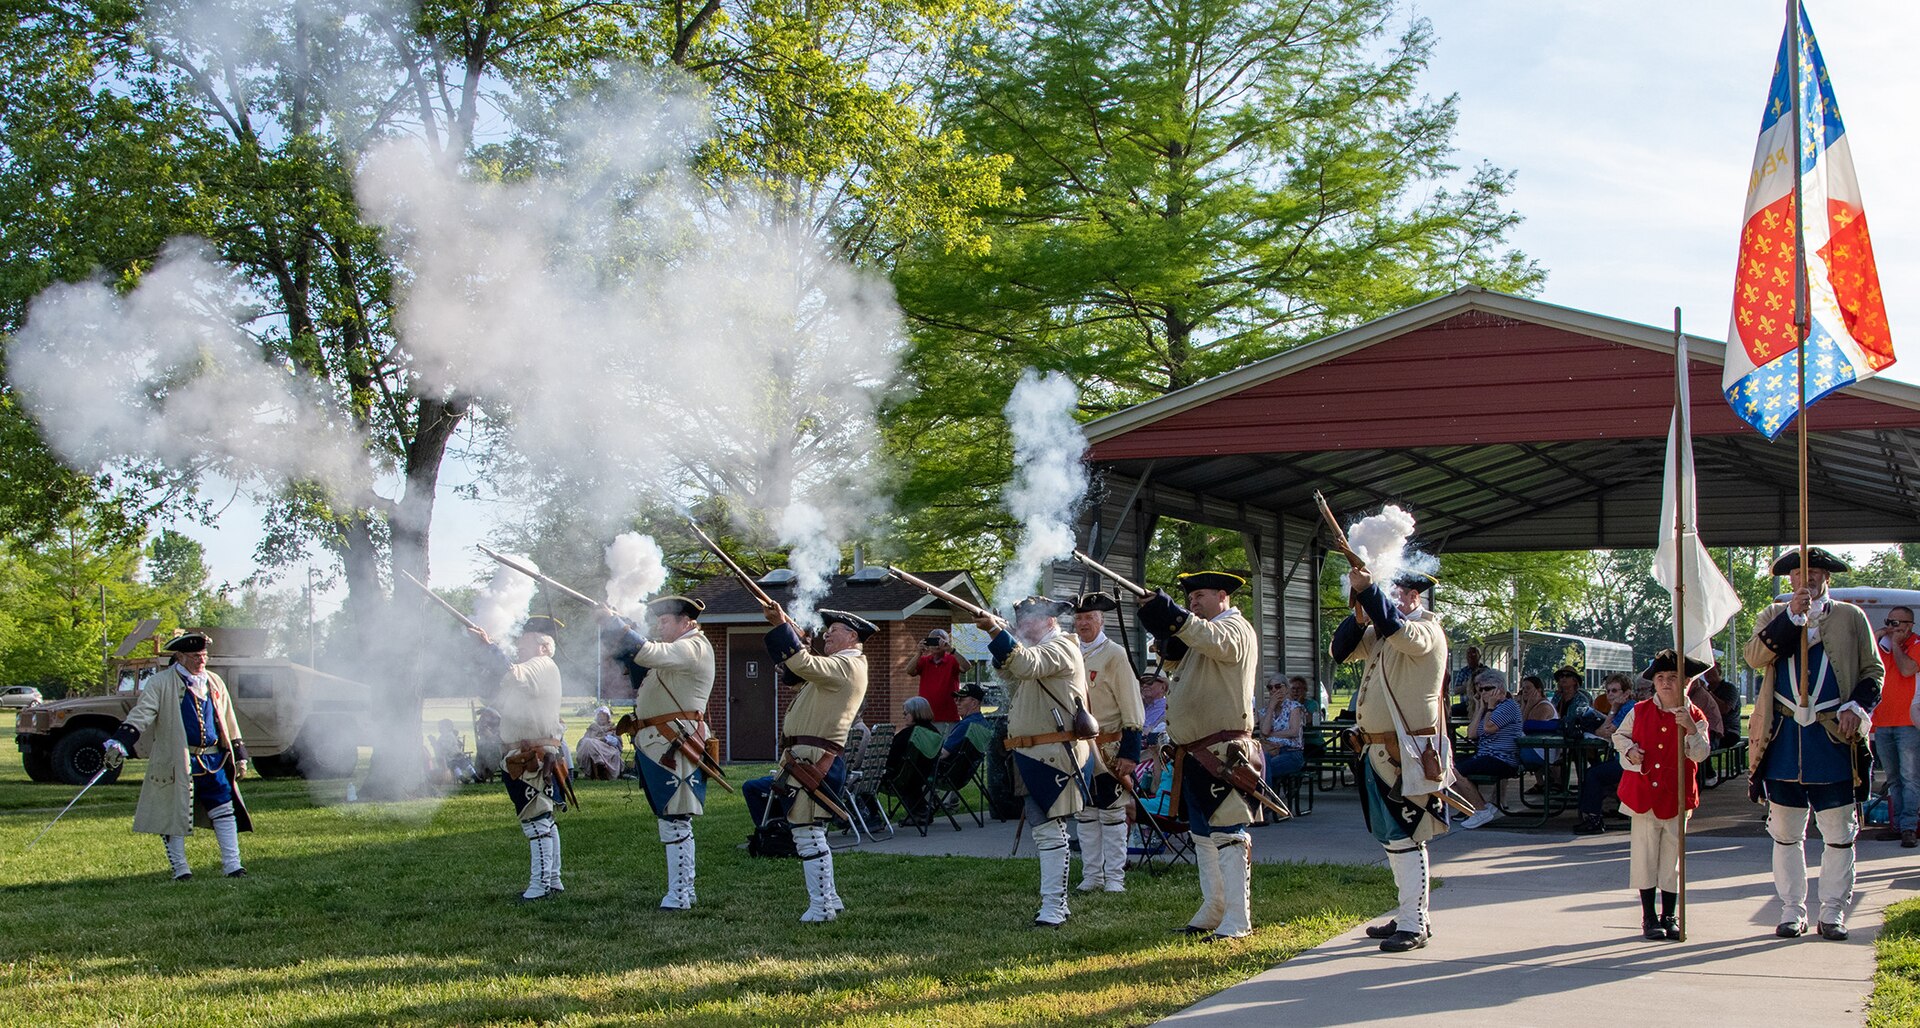 The French Marines Les Companie Franche de La Marine, de Fort de Chartres Commanded by Captain Don Martin, fire a rifle volley commemorating the Illinois National Guard’s 300th birthday during the celebration at Kaskaskia, May 9.